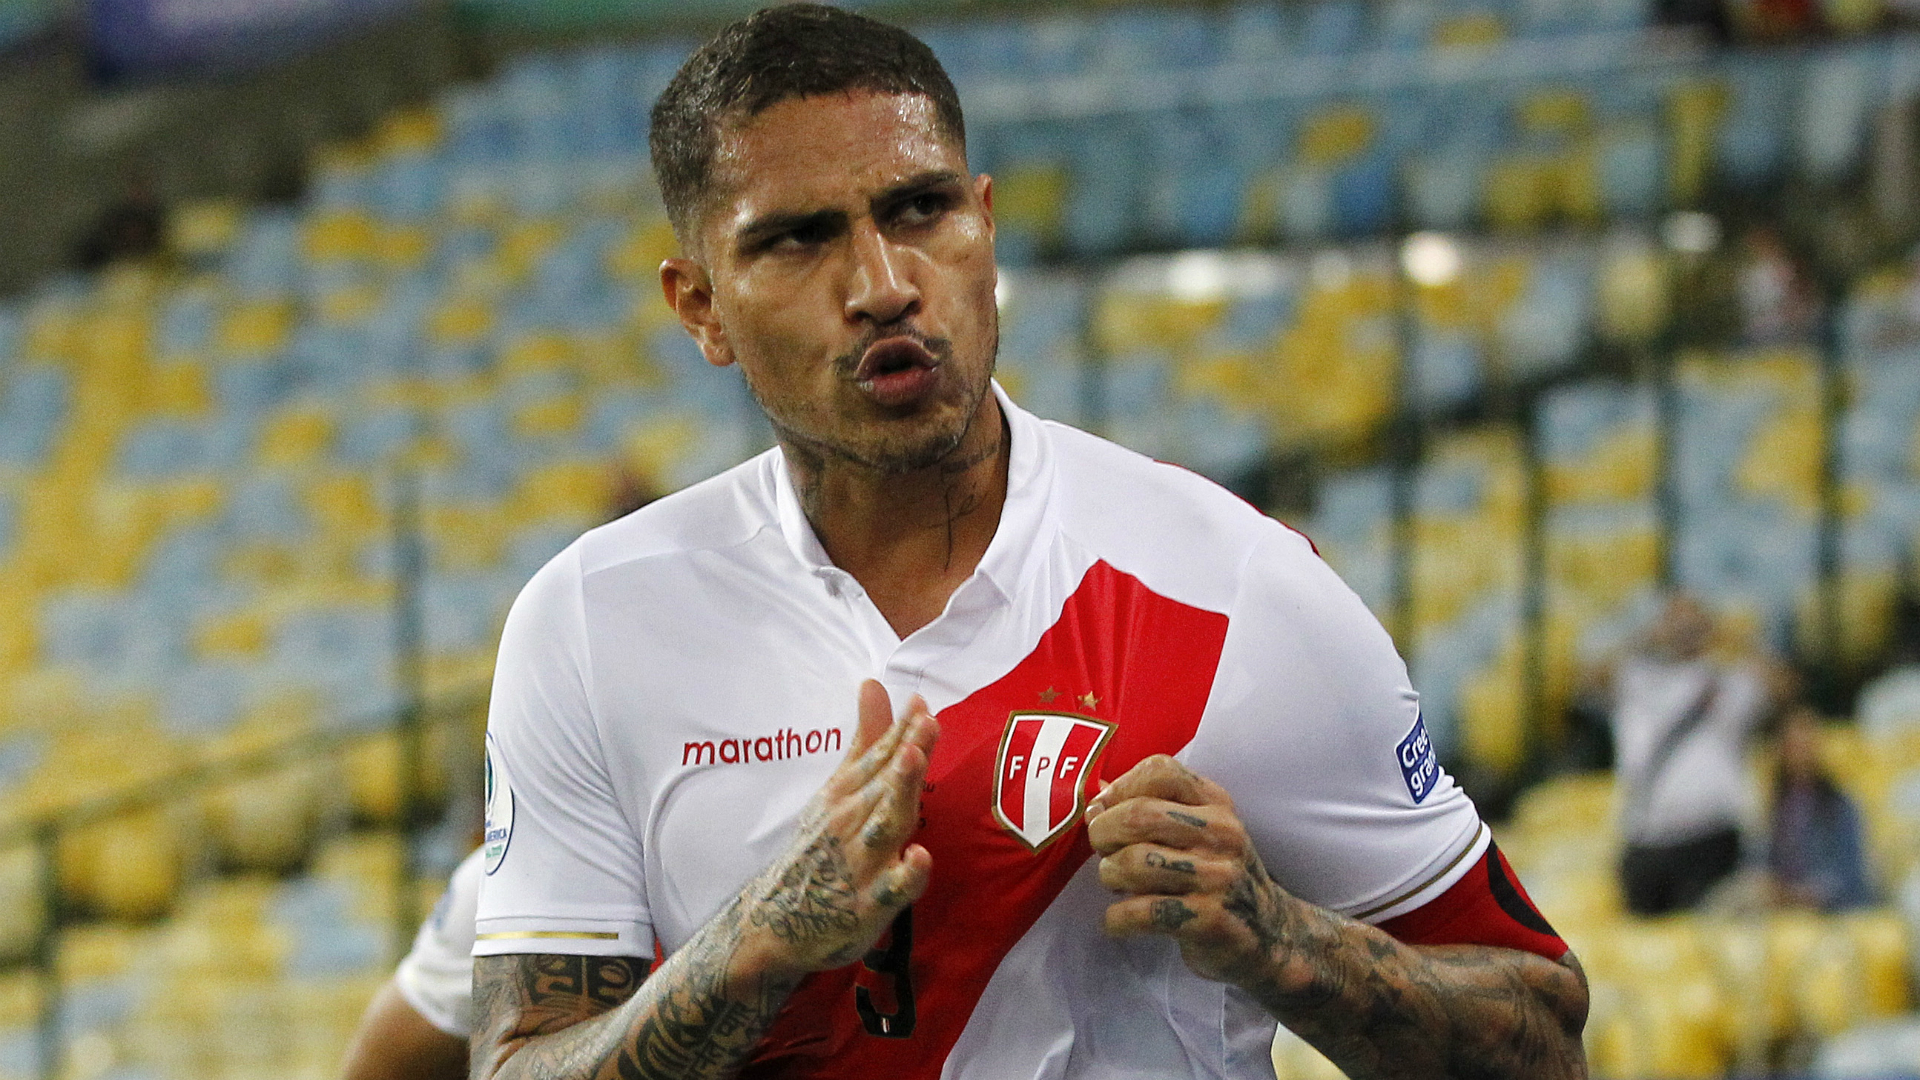 PaoloGuerrero-cropped (Getty Images)